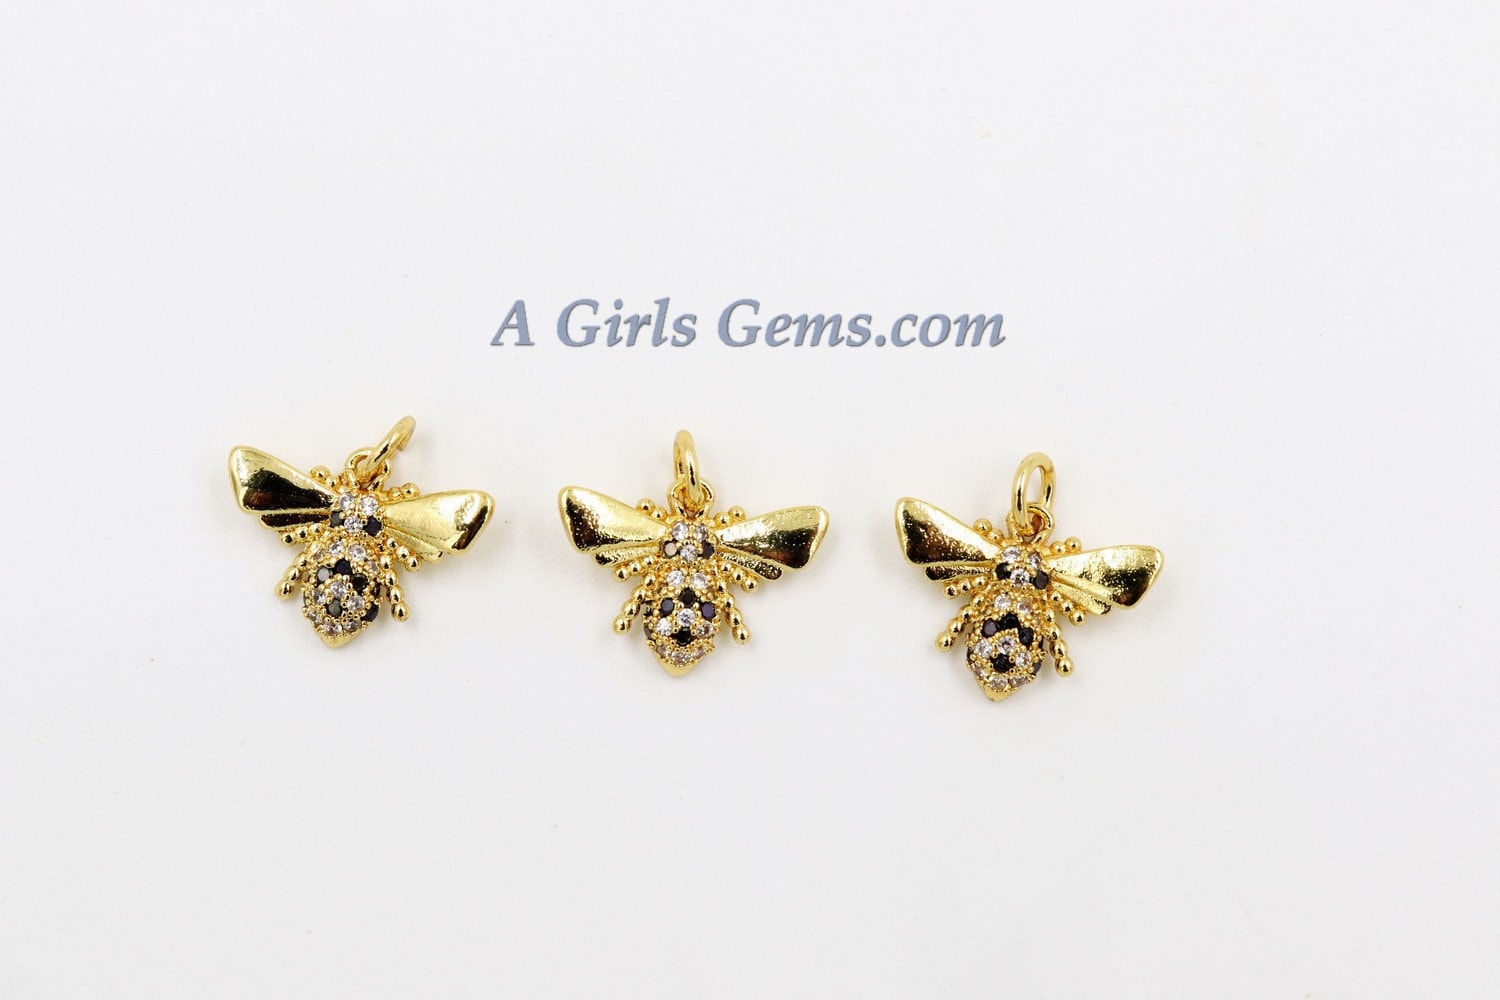 CZ Bee Charms, Tiny Bee Charms, 11 x 15 mm Small Bumble Bee Charms